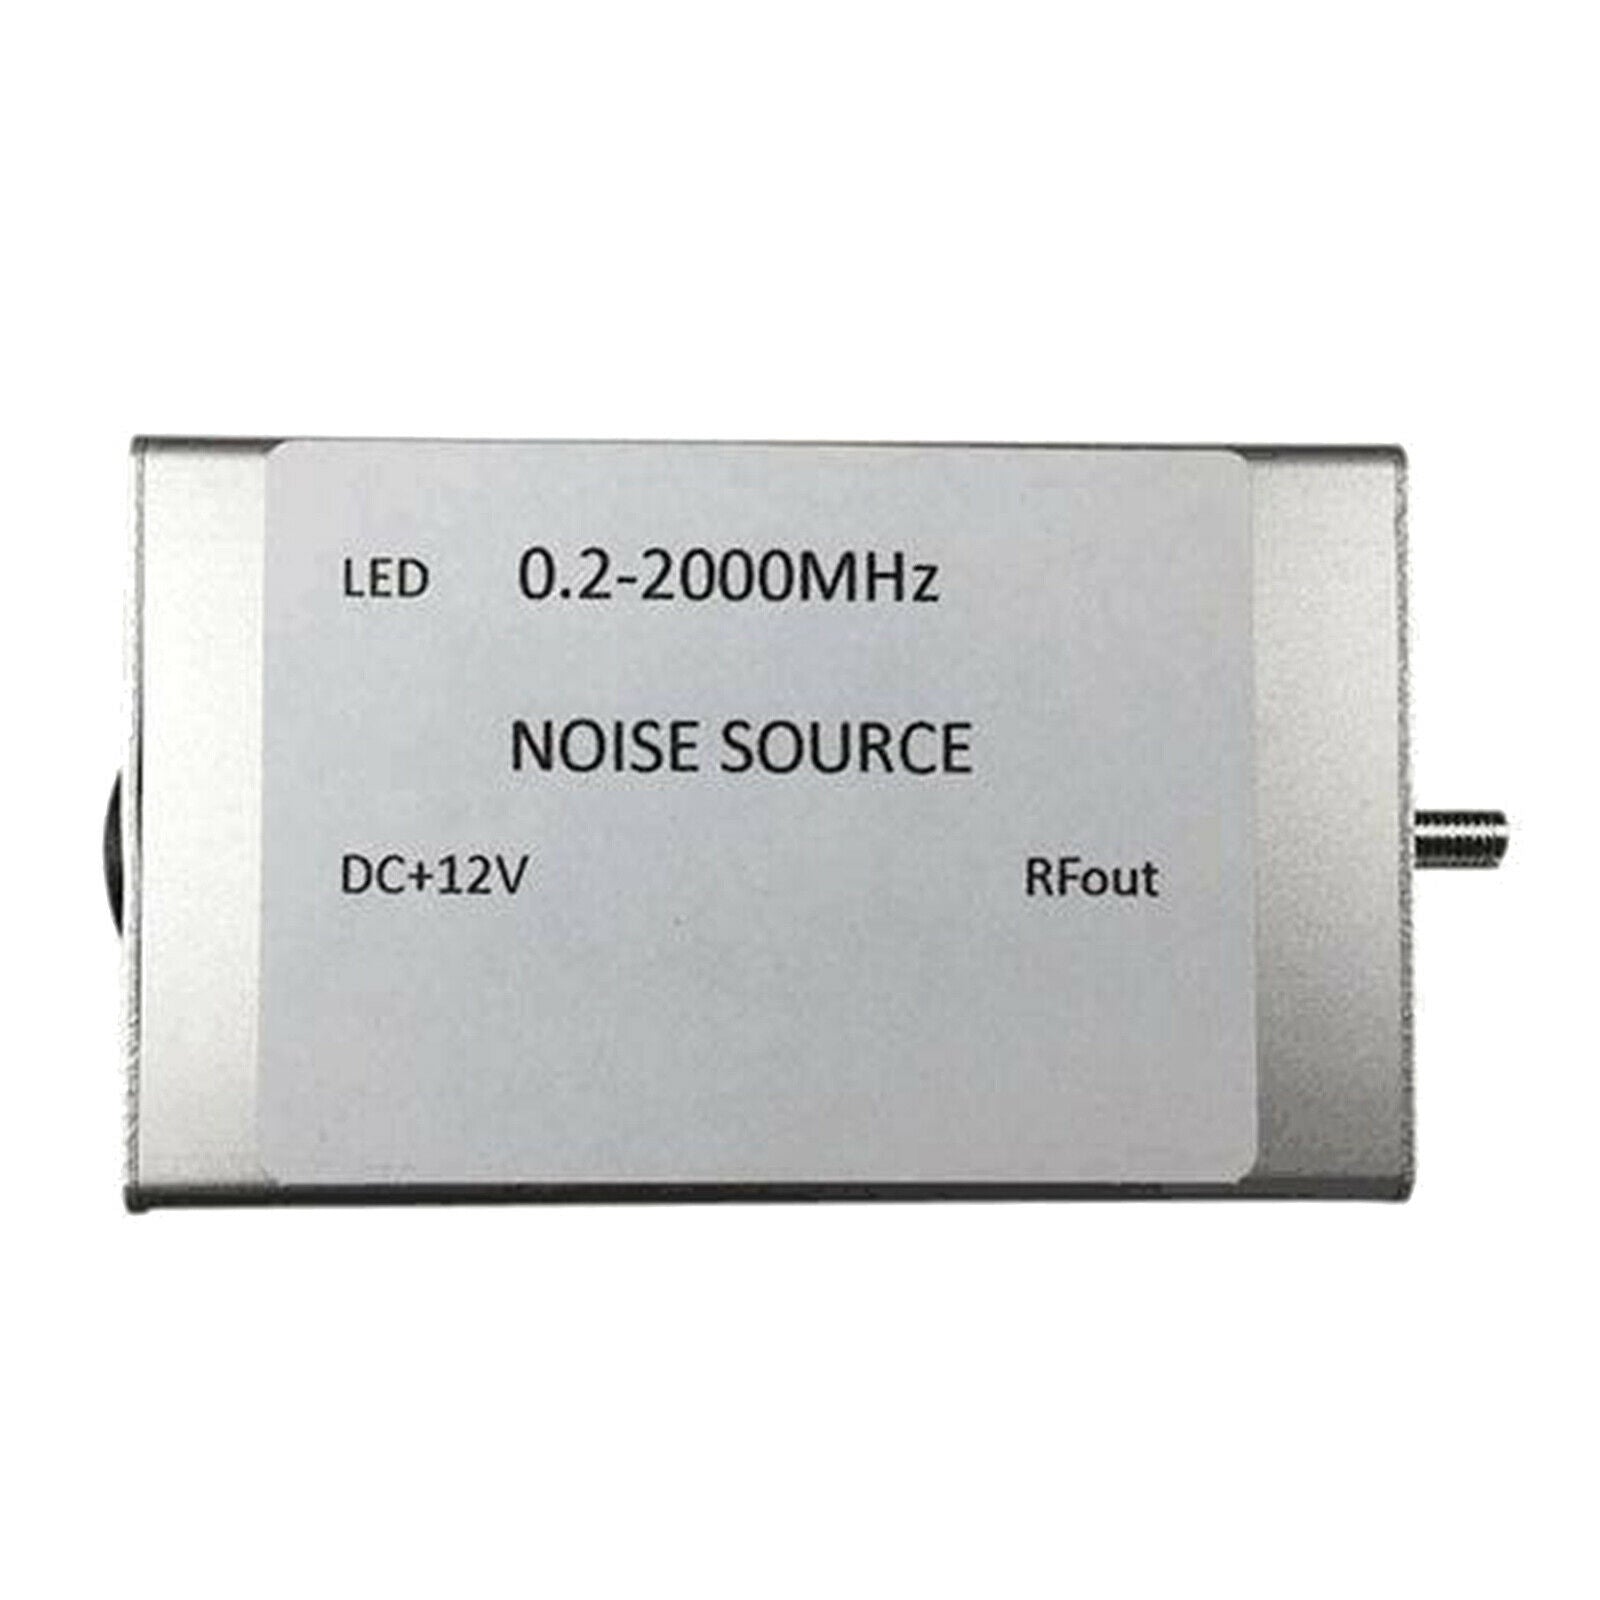 Noise Signal Generator Source DC+12V Spectrum Tracking Source 0.2-2000M